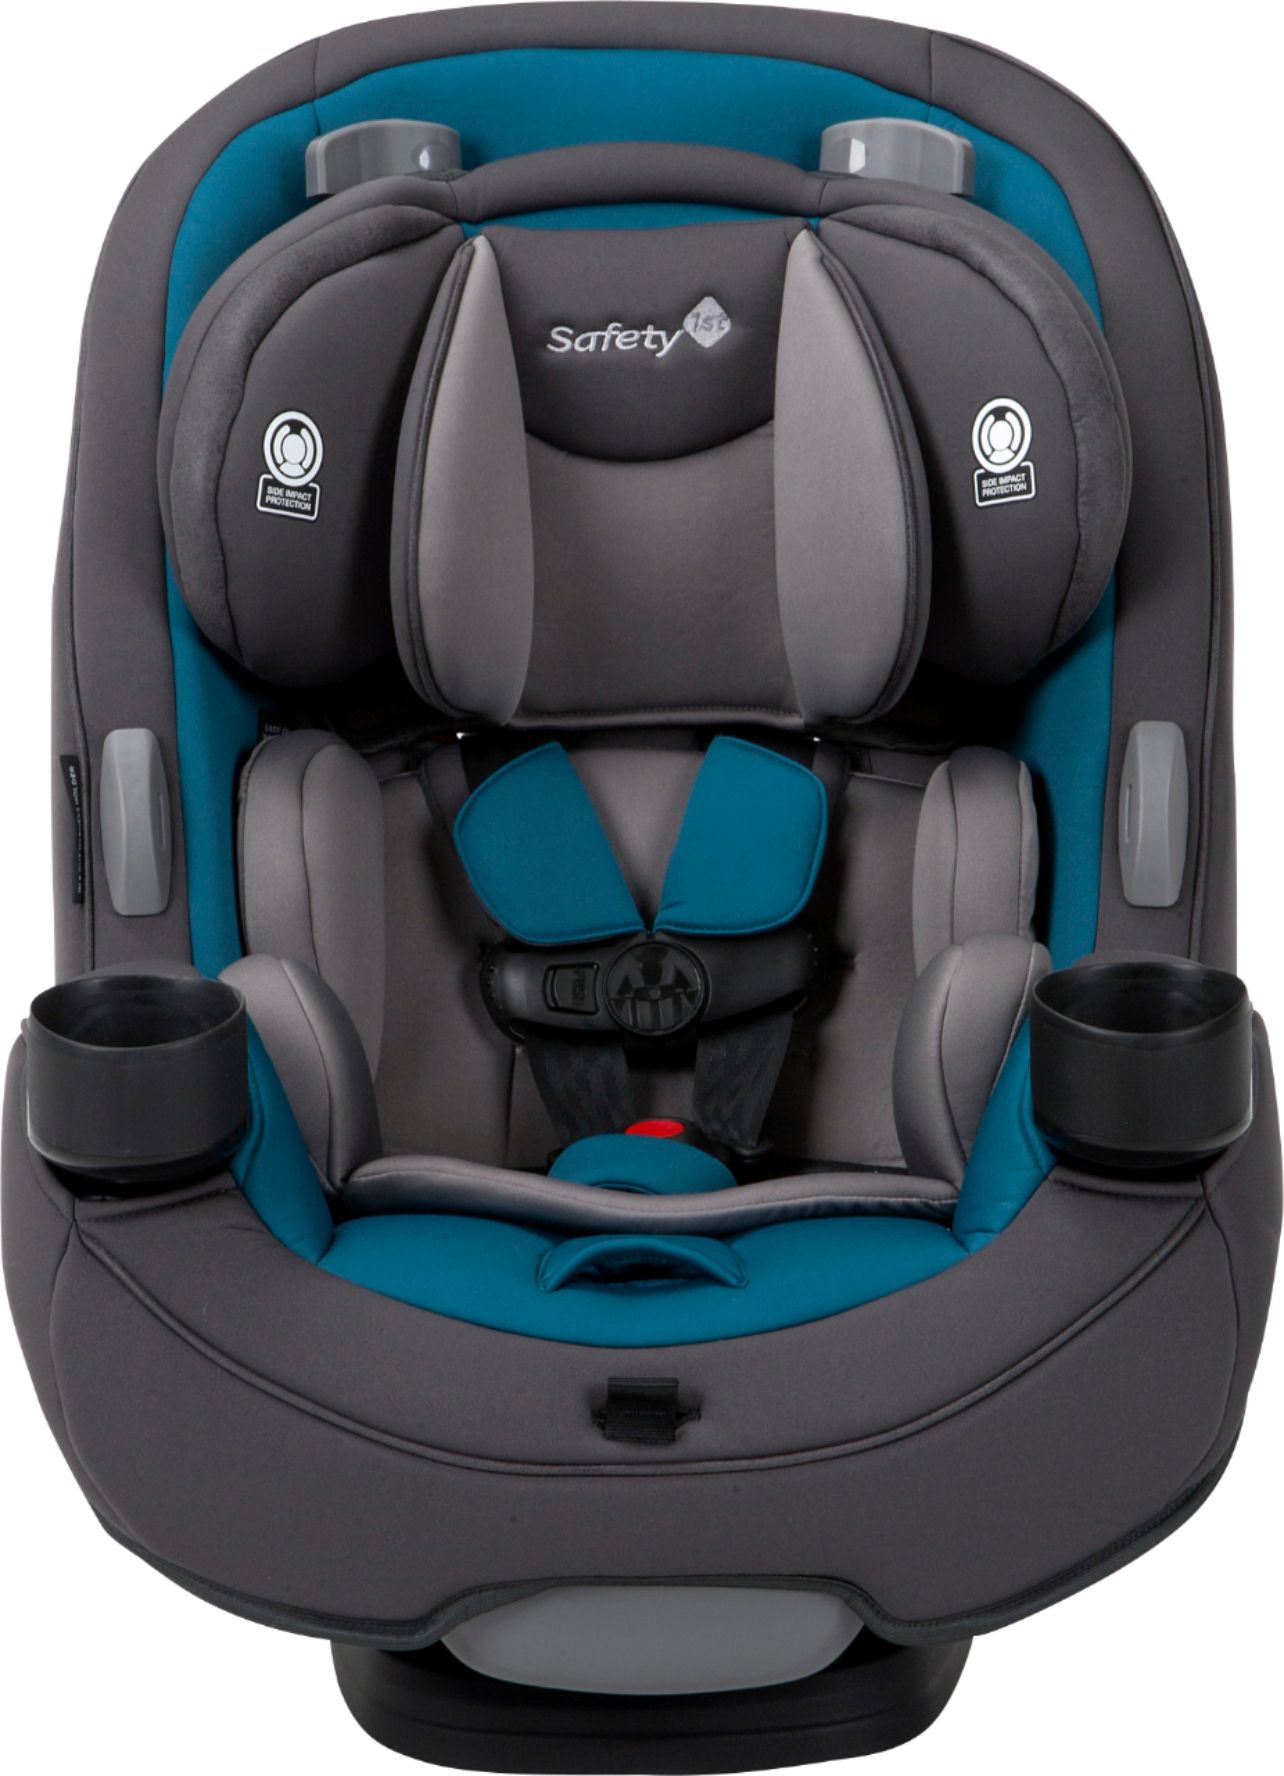 My Car Booster Seat – It's the Journey